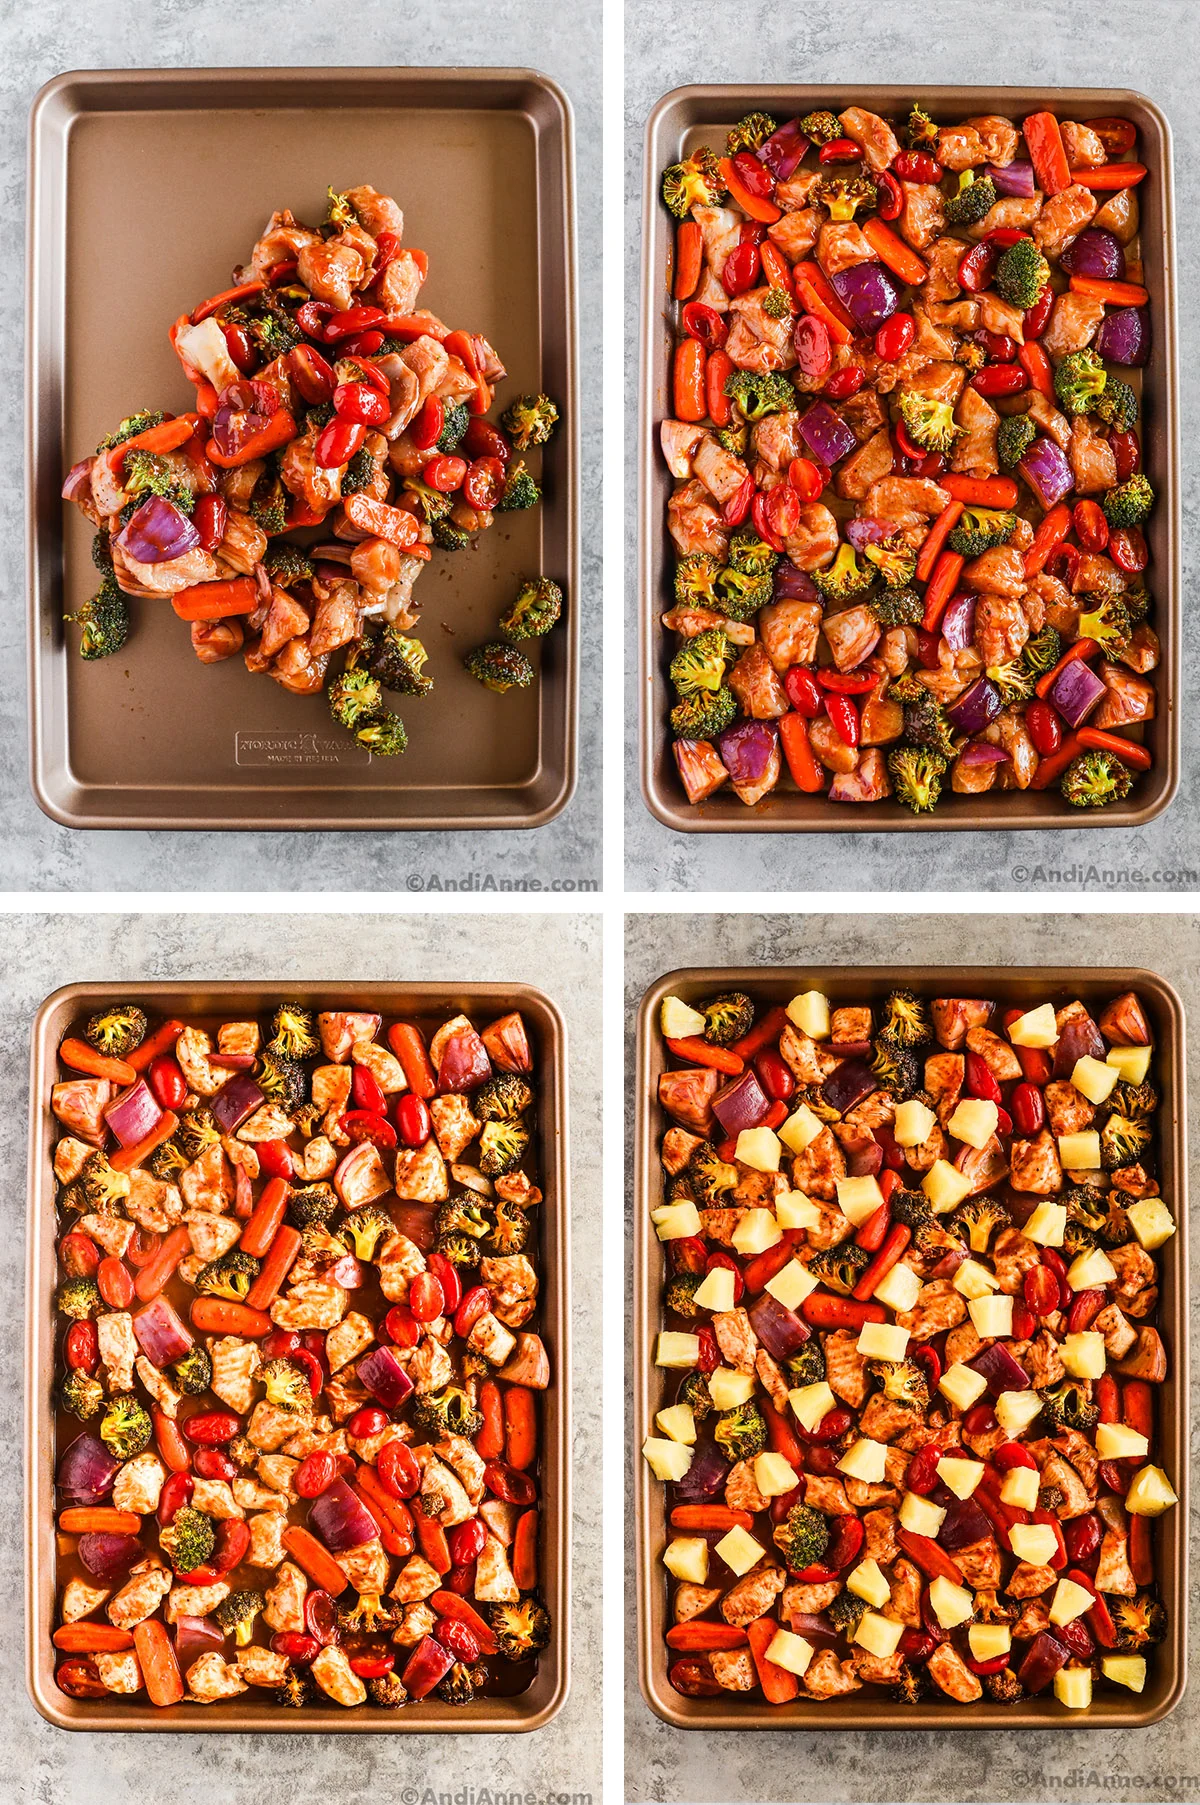 Four images. Sheet pan with various ingredients mixed together dumped on a sheet pan. Second is veggies, and chicken in a single layer on sheet pan. Third is pineapple chicken sheet pan dinner recipe.